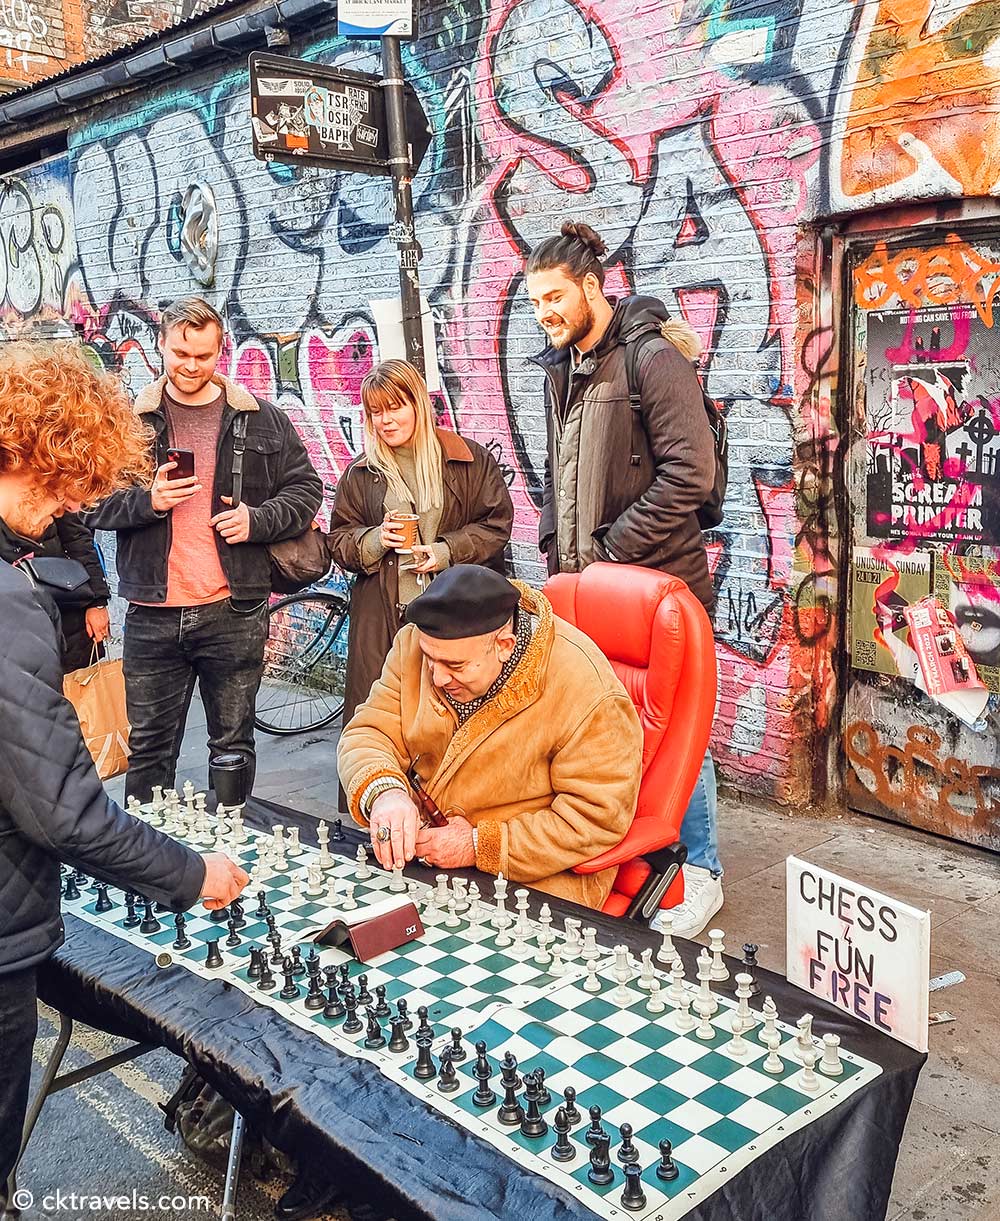 Norman playing fast chess in Brick Lane, Shoreditch east London